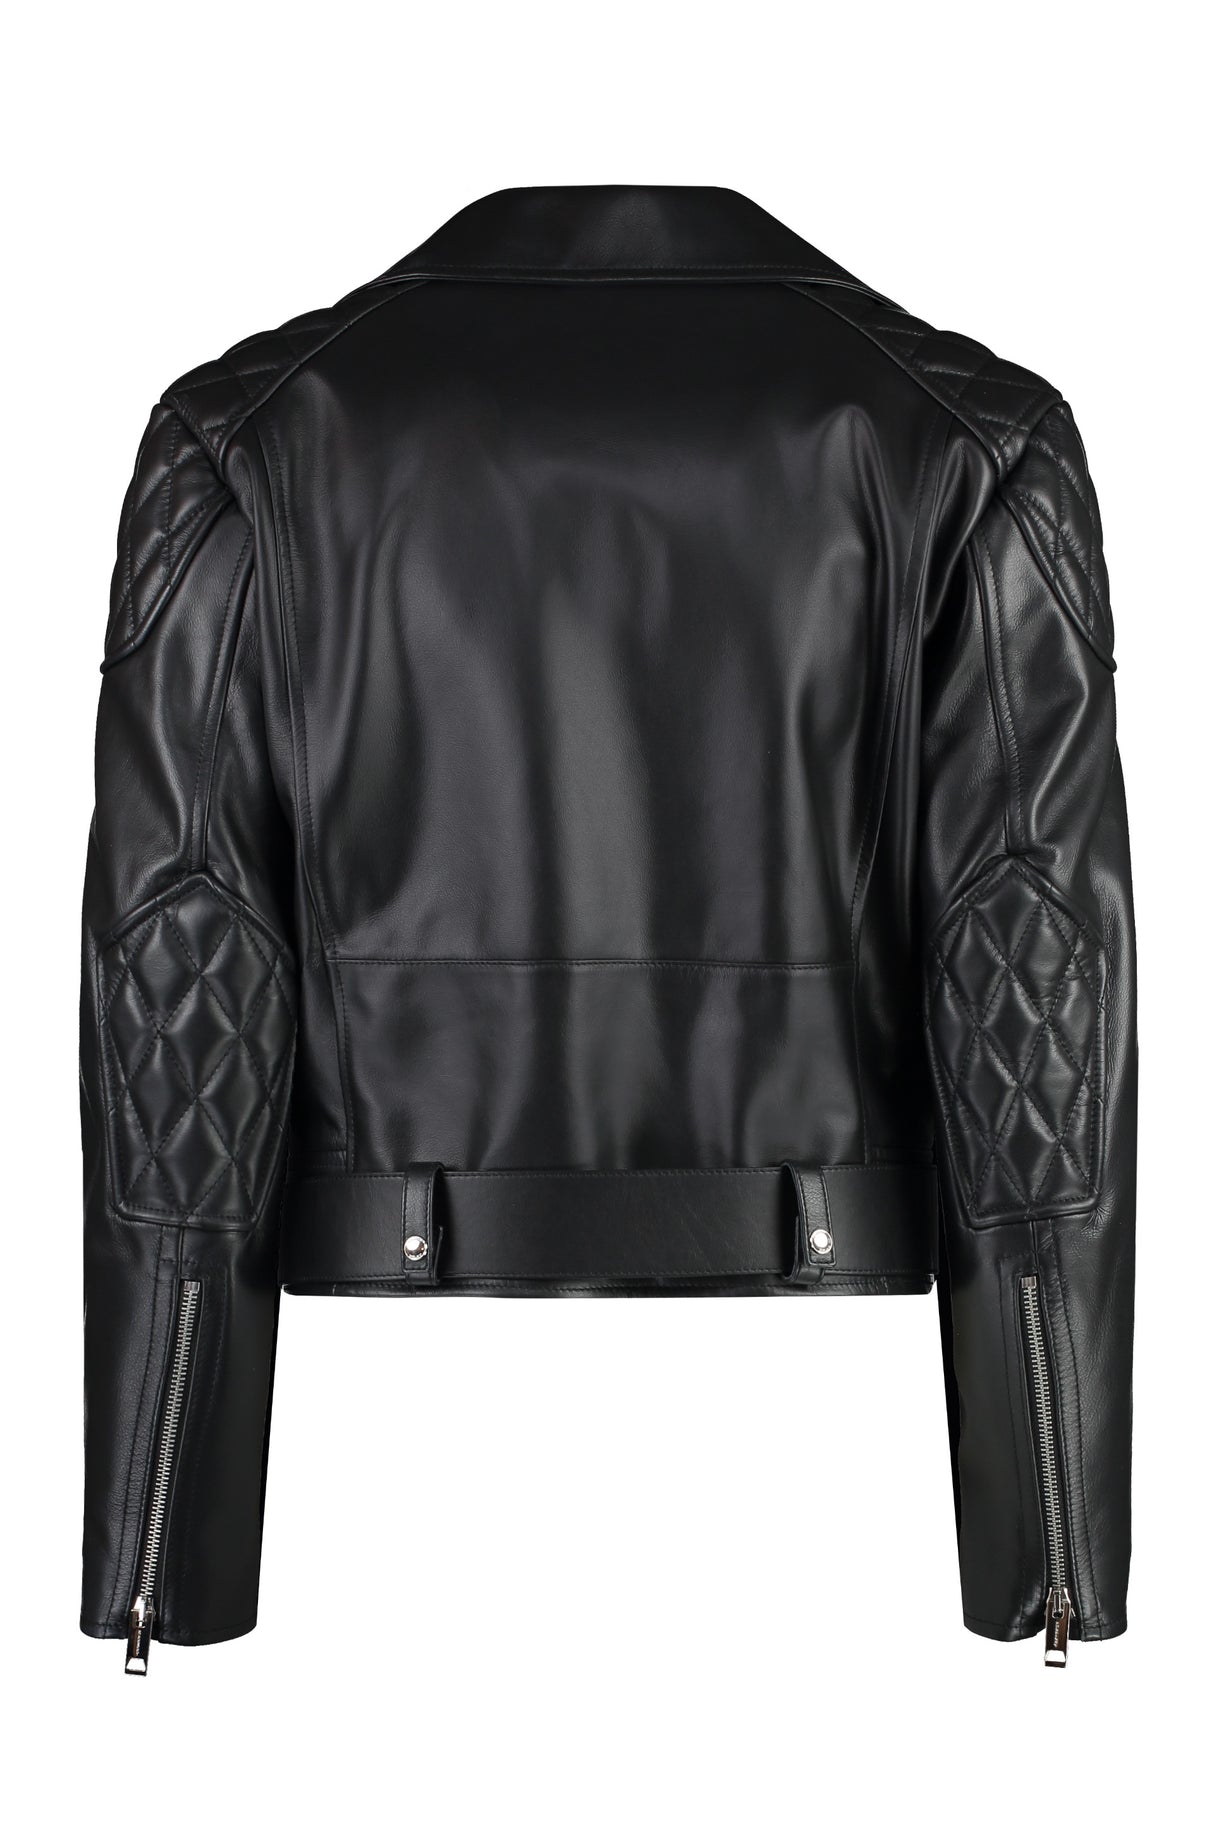 BURBERRY Stylish Black Leather Jacket for Women - SS23 Collection